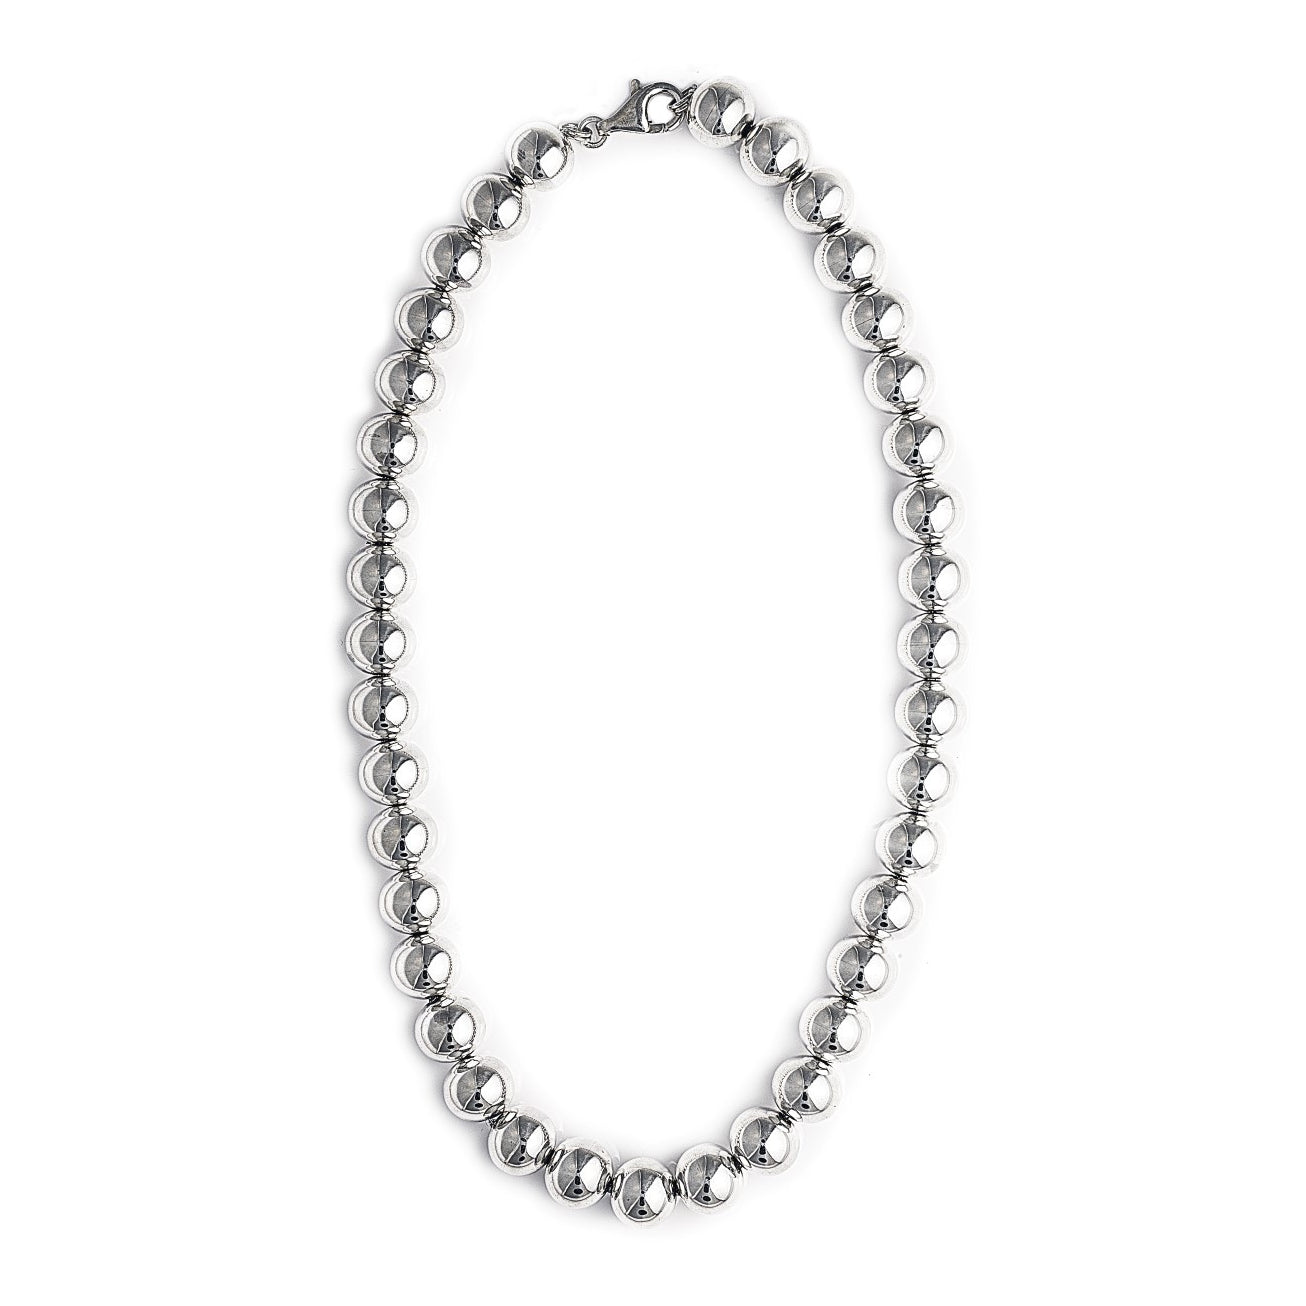 The beautiful Audrey Necklace in 925 sterling silver features silver beads threaded onto a chain. It's a modern and elegant take on the traditional pearl necklace. Luxury jewellery by Bellagio & Co. Worldwide Shipping plus FREE shipping for orders over $150 in Australia.